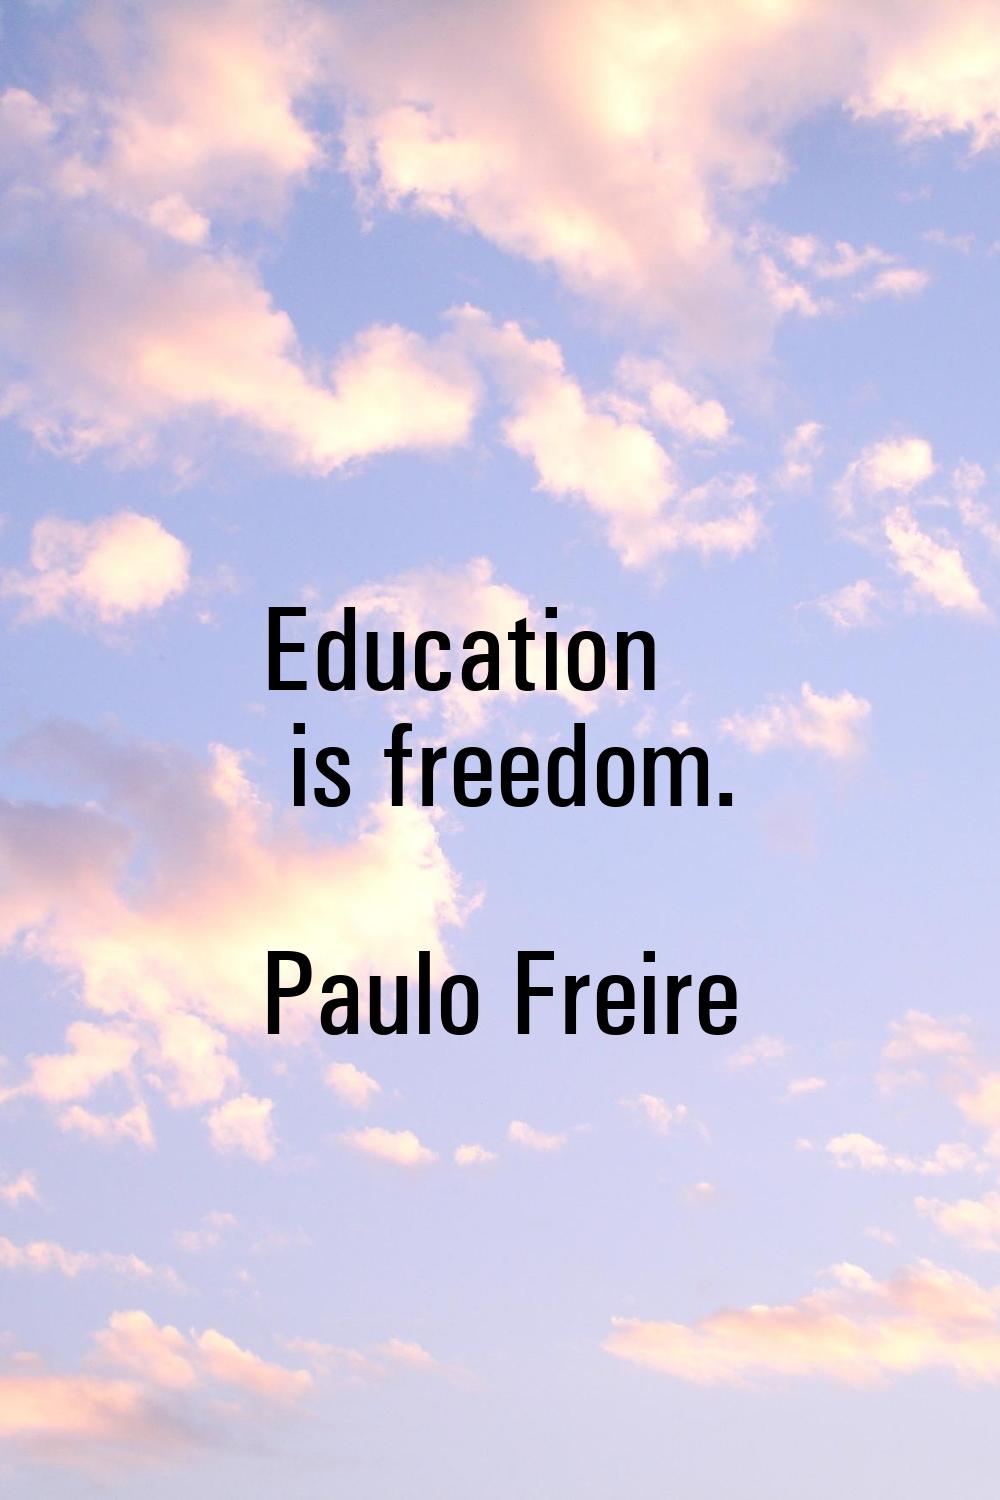 Education is freedom.